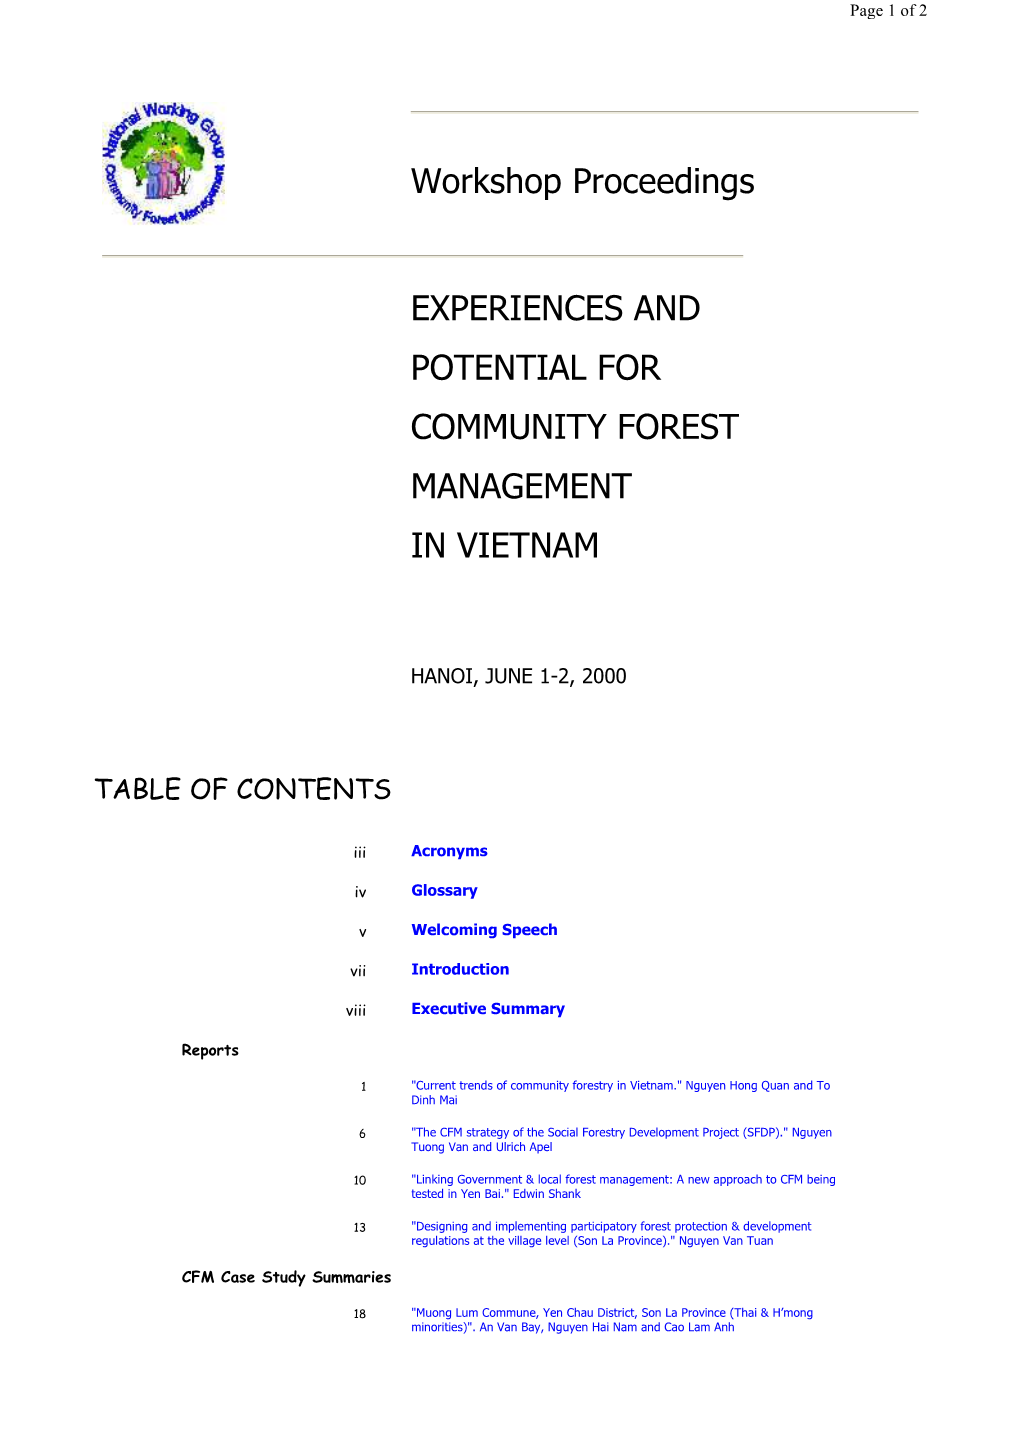 Workshop Proceedings EXPERIENCES and POTENTIAL for COMMUNITY FOREST MANAGEMENT in VIETNAM